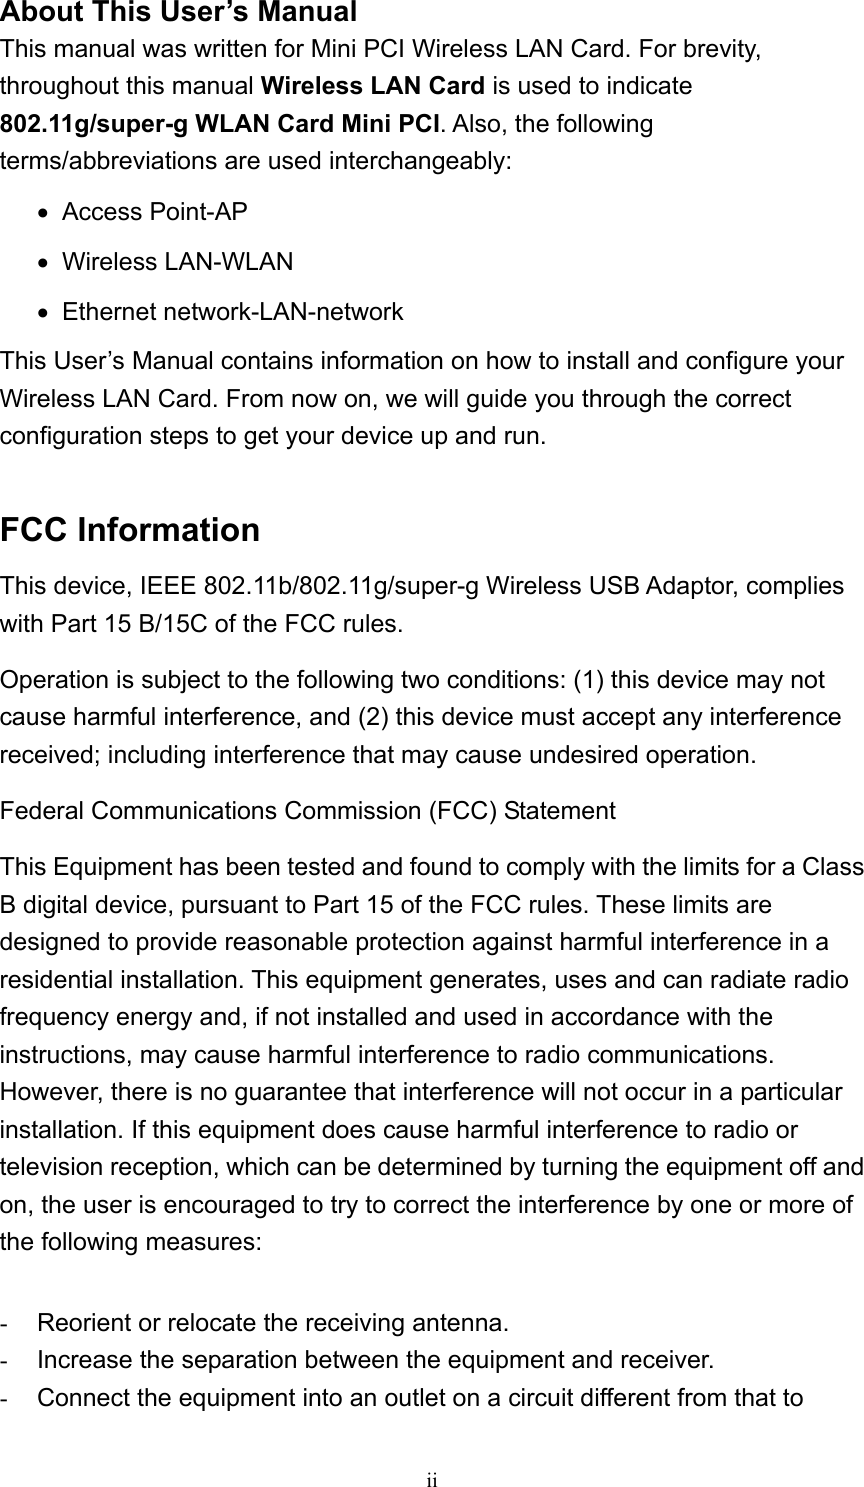  ii About This User’s Manual This manual was written for Mini PCI Wireless LAN Card. For brevity, throughout this manual Wireless LAN Card is used to indicate 802.11g/super-g WLAN Card Mini PCI. Also, the following terms/abbreviations are used interchangeably: •   Access  Point-AP •   Wireless  LAN-WLAN •   Ethernet  network-LAN-network This User’s Manual contains information on how to install and configure your Wireless LAN Card. From now on, we will guide you through the correct configuration steps to get your device up and run.  FCC Information This device, IEEE 802.11b/802.11g/super-g Wireless USB Adaptor, complies with Part 15 B/15C of the FCC rules. Operation is subject to the following two conditions: (1) this device may not cause harmful interference, and (2) this device must accept any interference received; including interference that may cause undesired operation. Federal Communications Commission (FCC) Statement This Equipment has been tested and found to comply with the limits for a Class B digital device, pursuant to Part 15 of the FCC rules. These limits are designed to provide reasonable protection against harmful interference in a residential installation. This equipment generates, uses and can radiate radio frequency energy and, if not installed and used in accordance with the instructions, may cause harmful interference to radio communications. However, there is no guarantee that interference will not occur in a particular installation. If this equipment does cause harmful interference to radio or television reception, which can be determined by turning the equipment off and on, the user is encouraged to try to correct the interference by one or more of the following measures:  -  Reorient or relocate the receiving antenna. -  Increase the separation between the equipment and receiver. -  Connect the equipment into an outlet on a circuit different from that to 